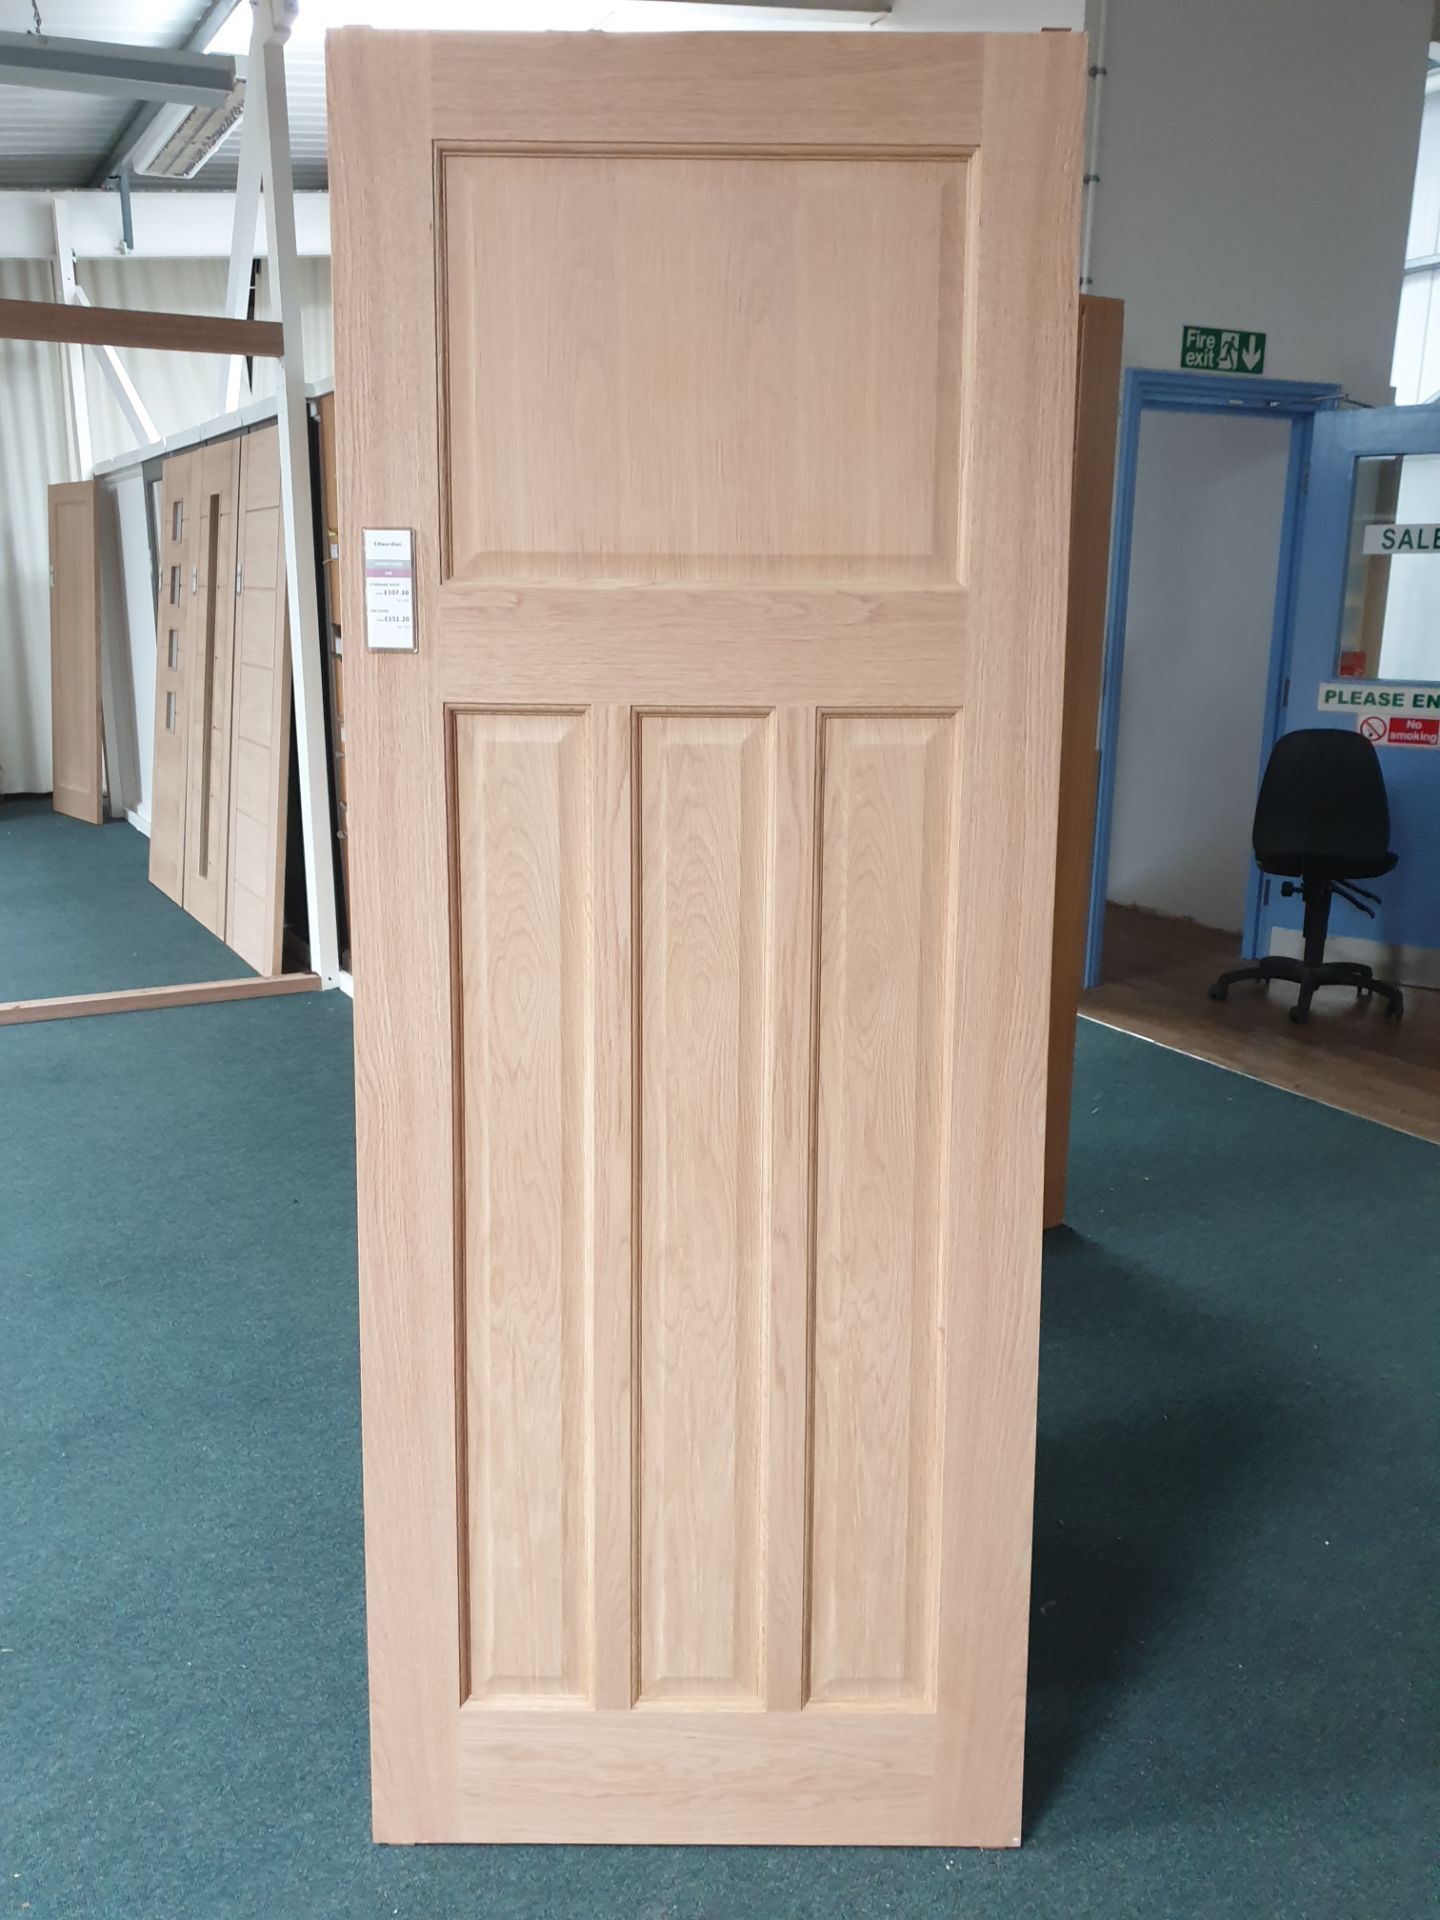 6 x Edwardian 4 Panel Internal Fire Door AW0EDWFD30 1981x762x44mm - Lots to be handed out in order